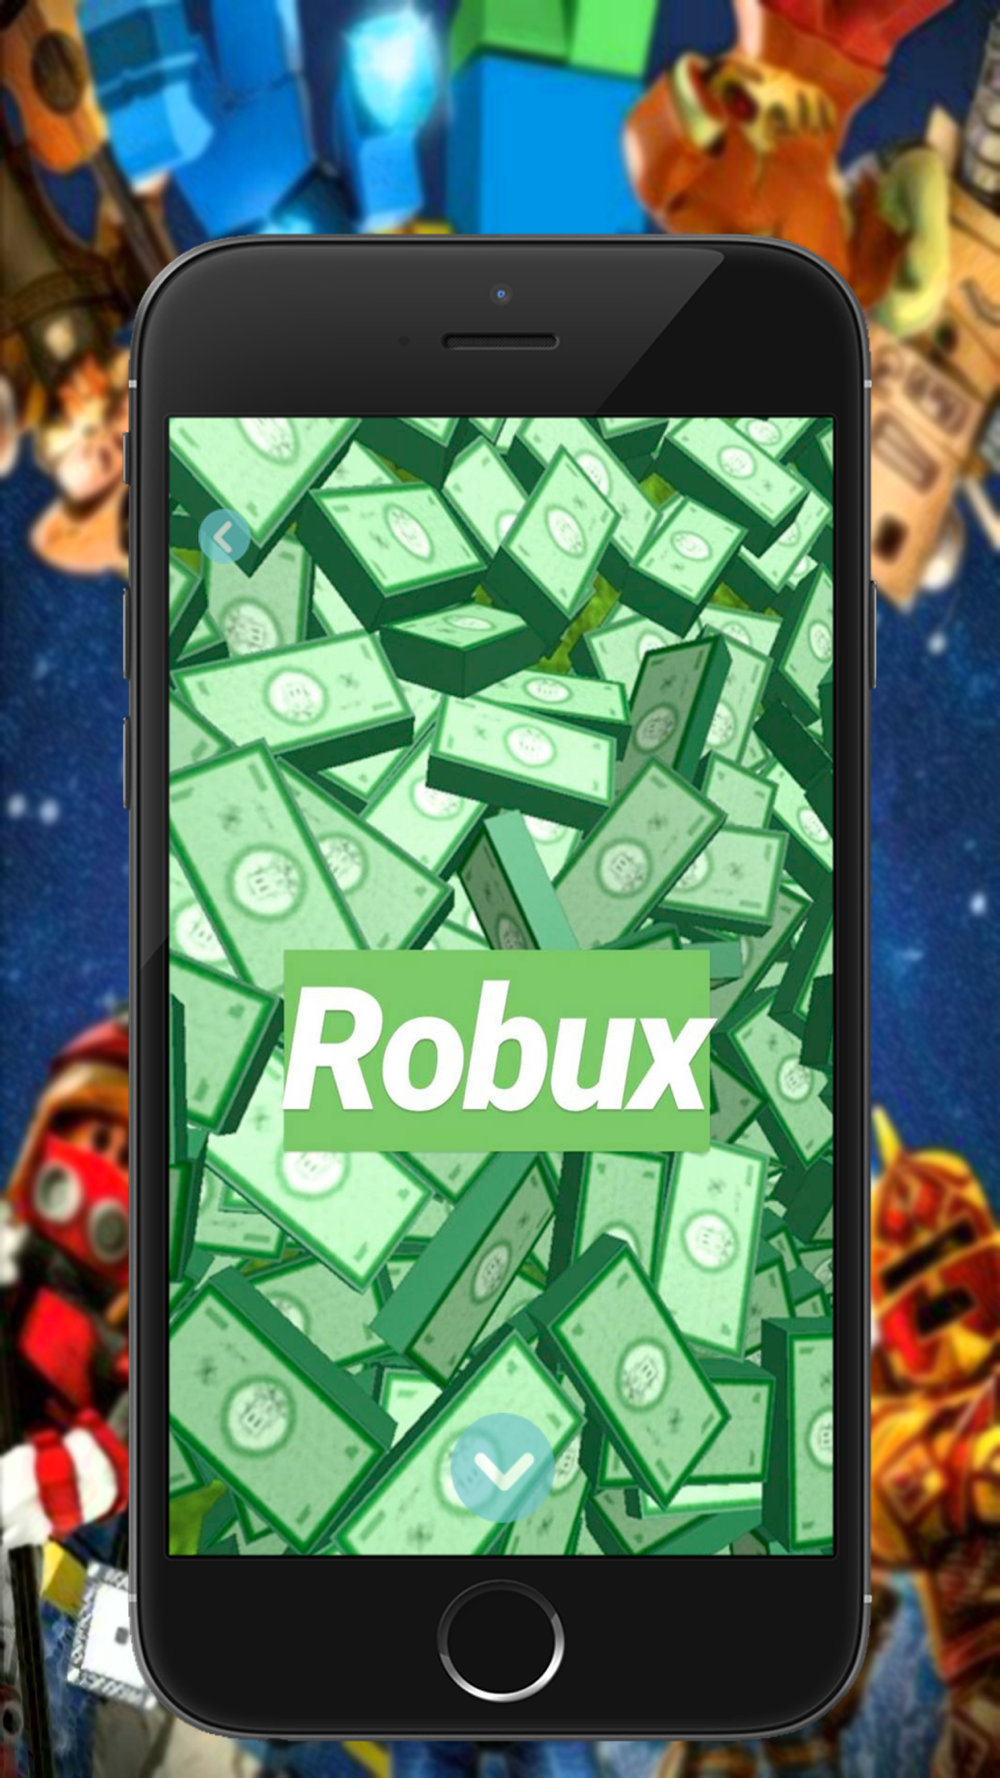 1 Robux Wallpapers For Roblox Download App For Iphone Steprimo Com - what can i buy with 1 robux on roblox